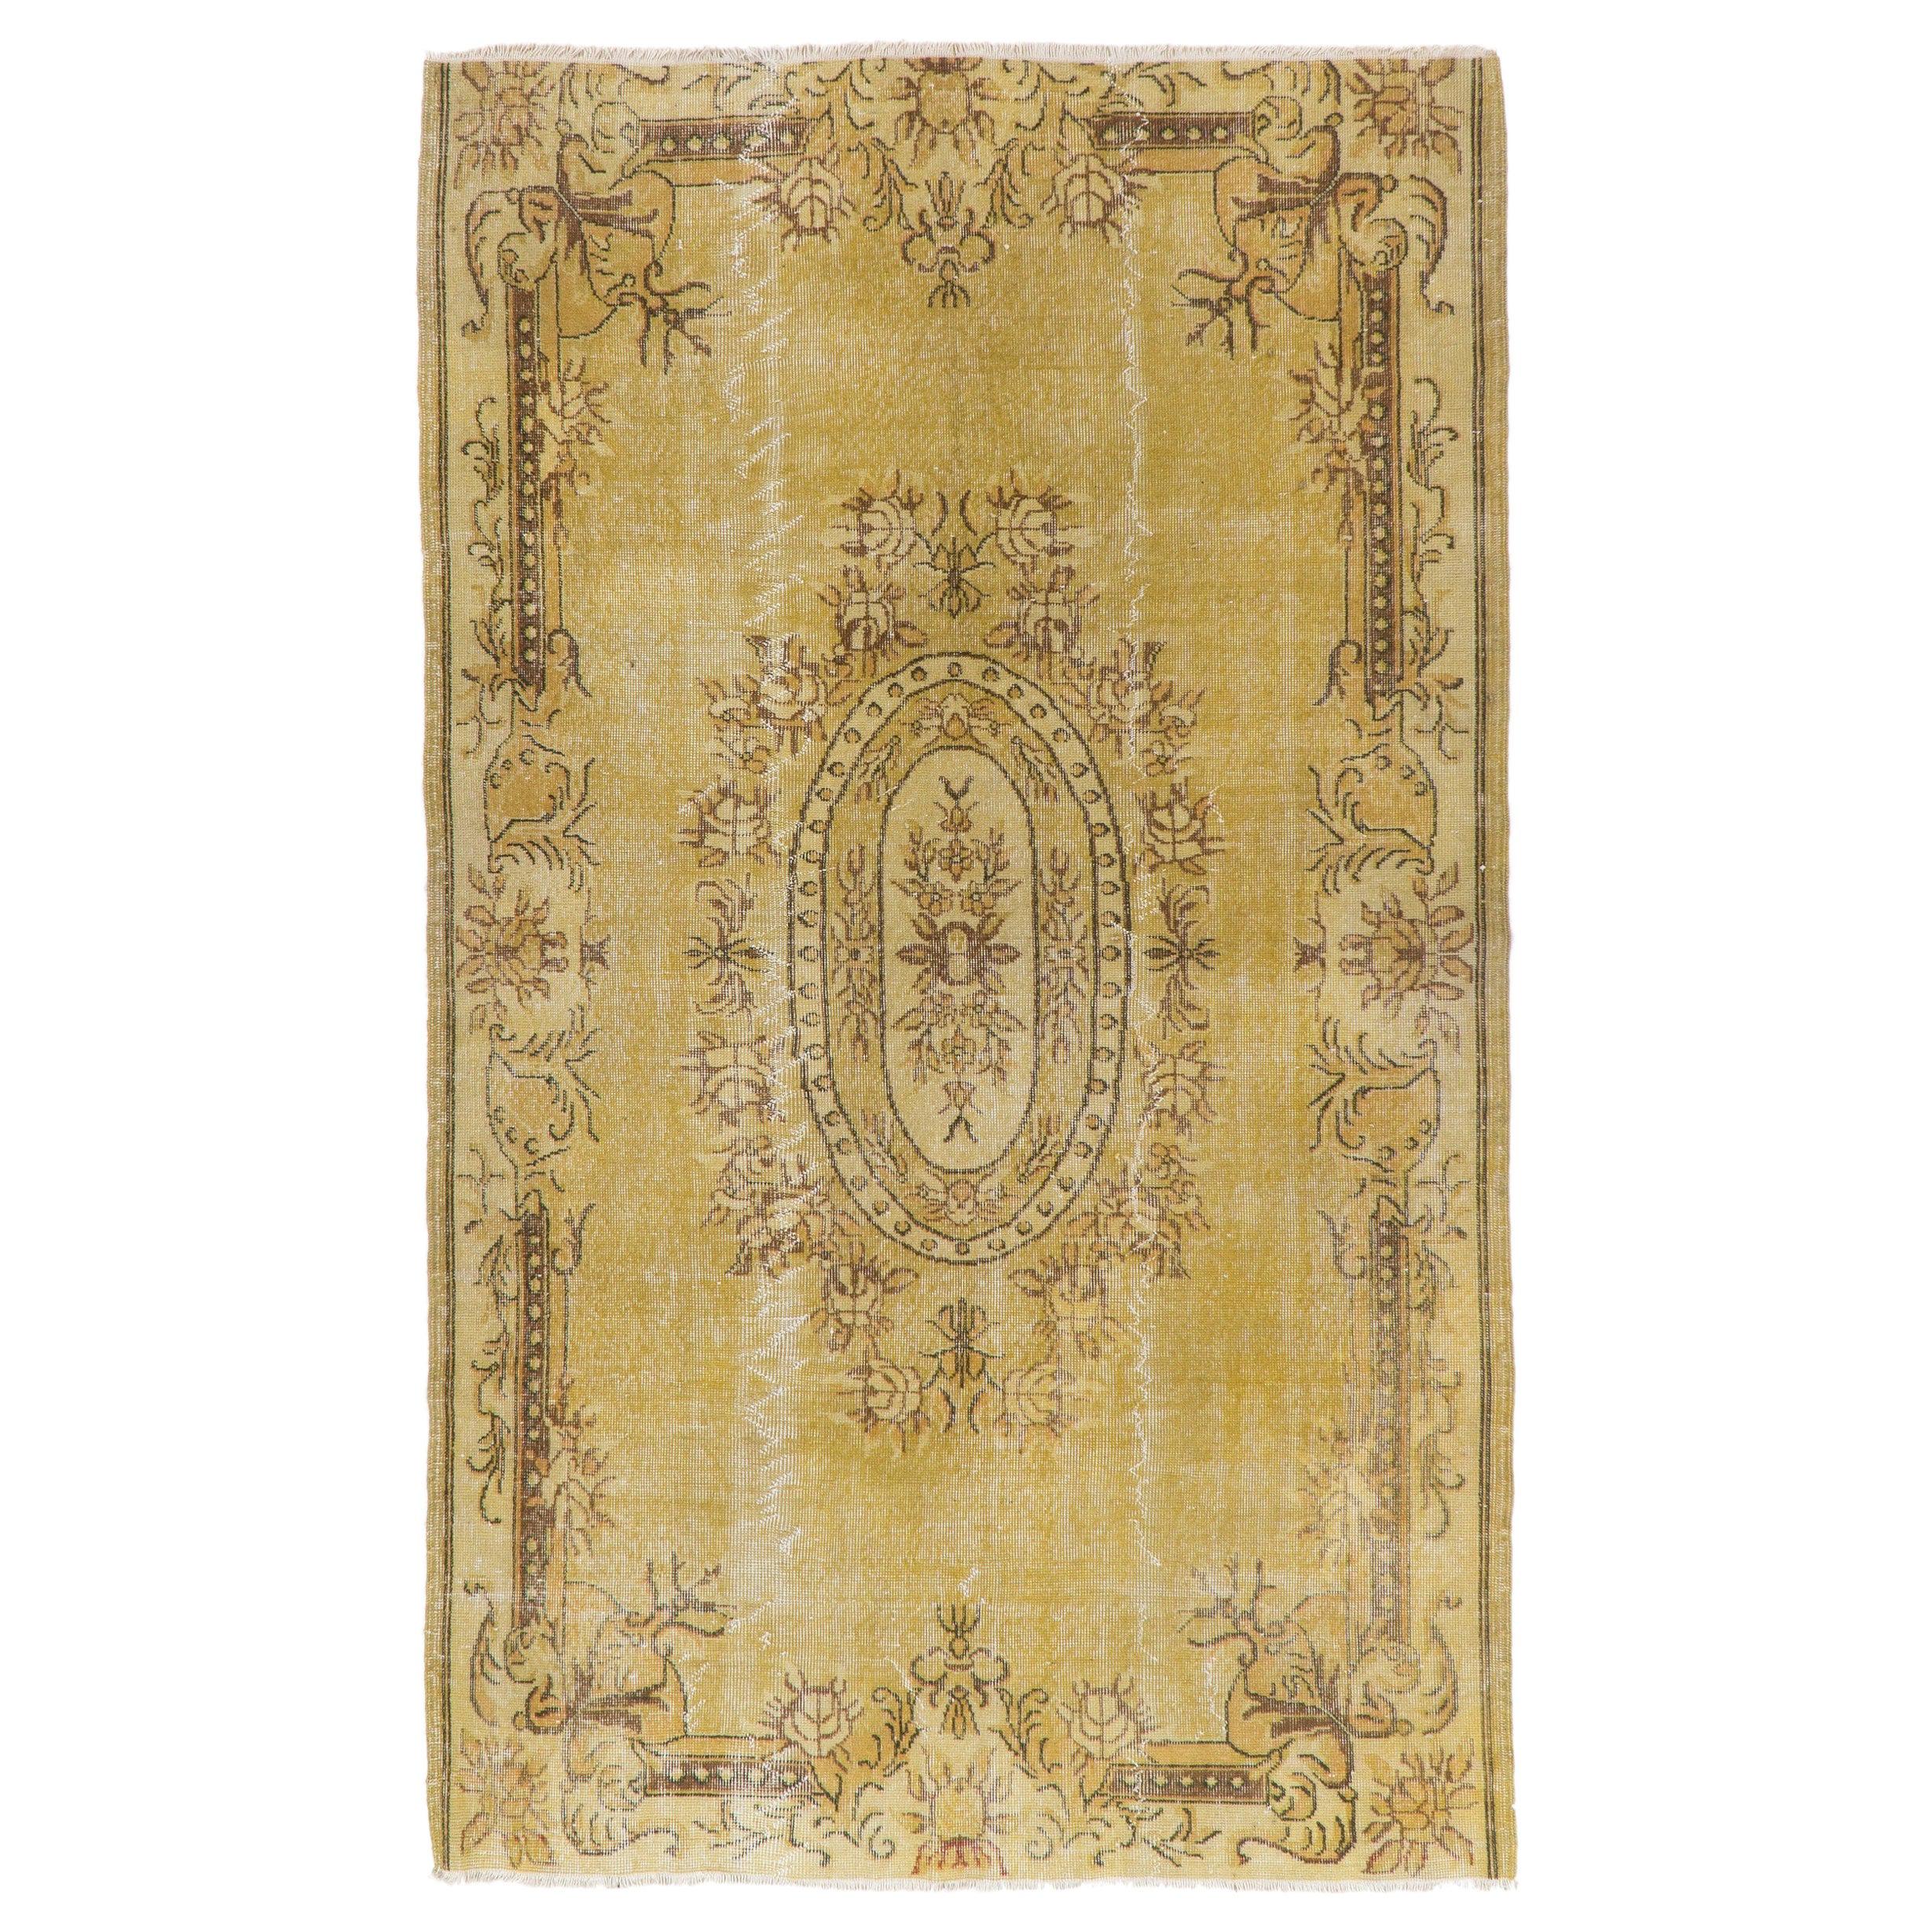 5.2x9 Ft Handmade Vintage Baroque Style Area Rug in Yellow. Modern Wool Carpet For Sale